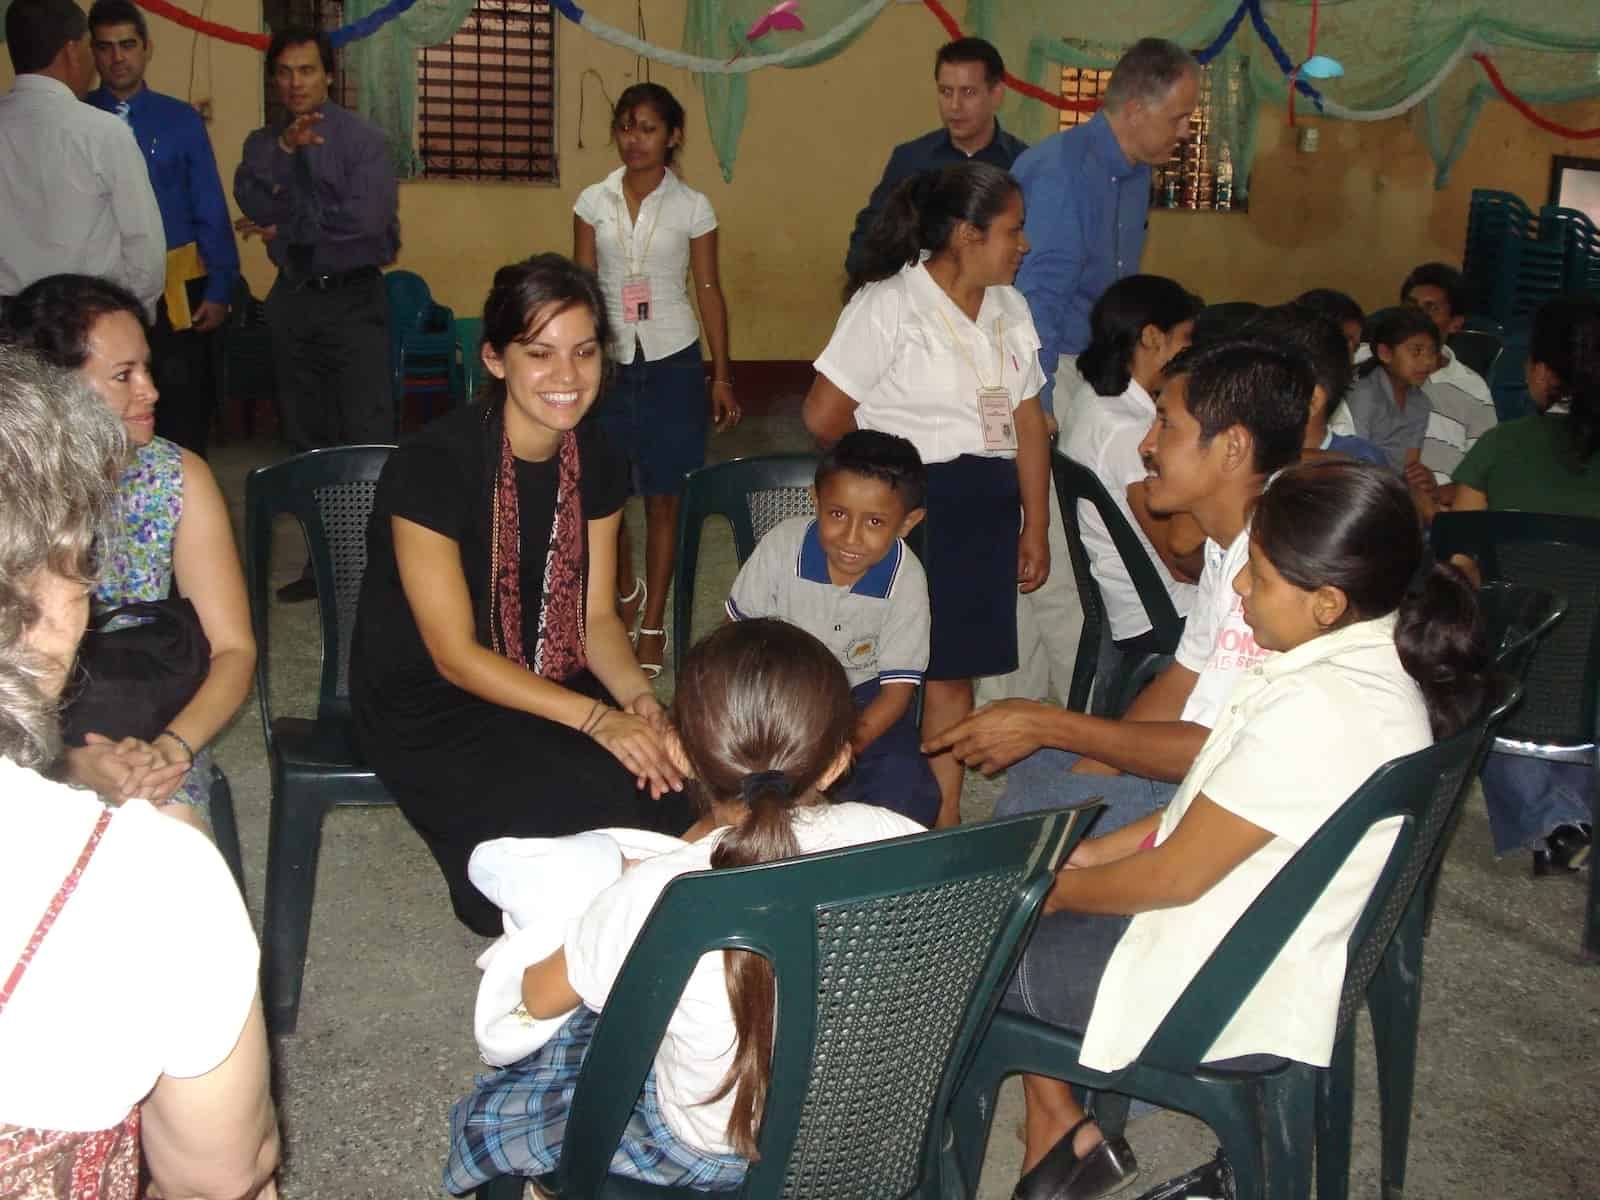 A girl sits in a circle of chairs, talking to children inside a church room.